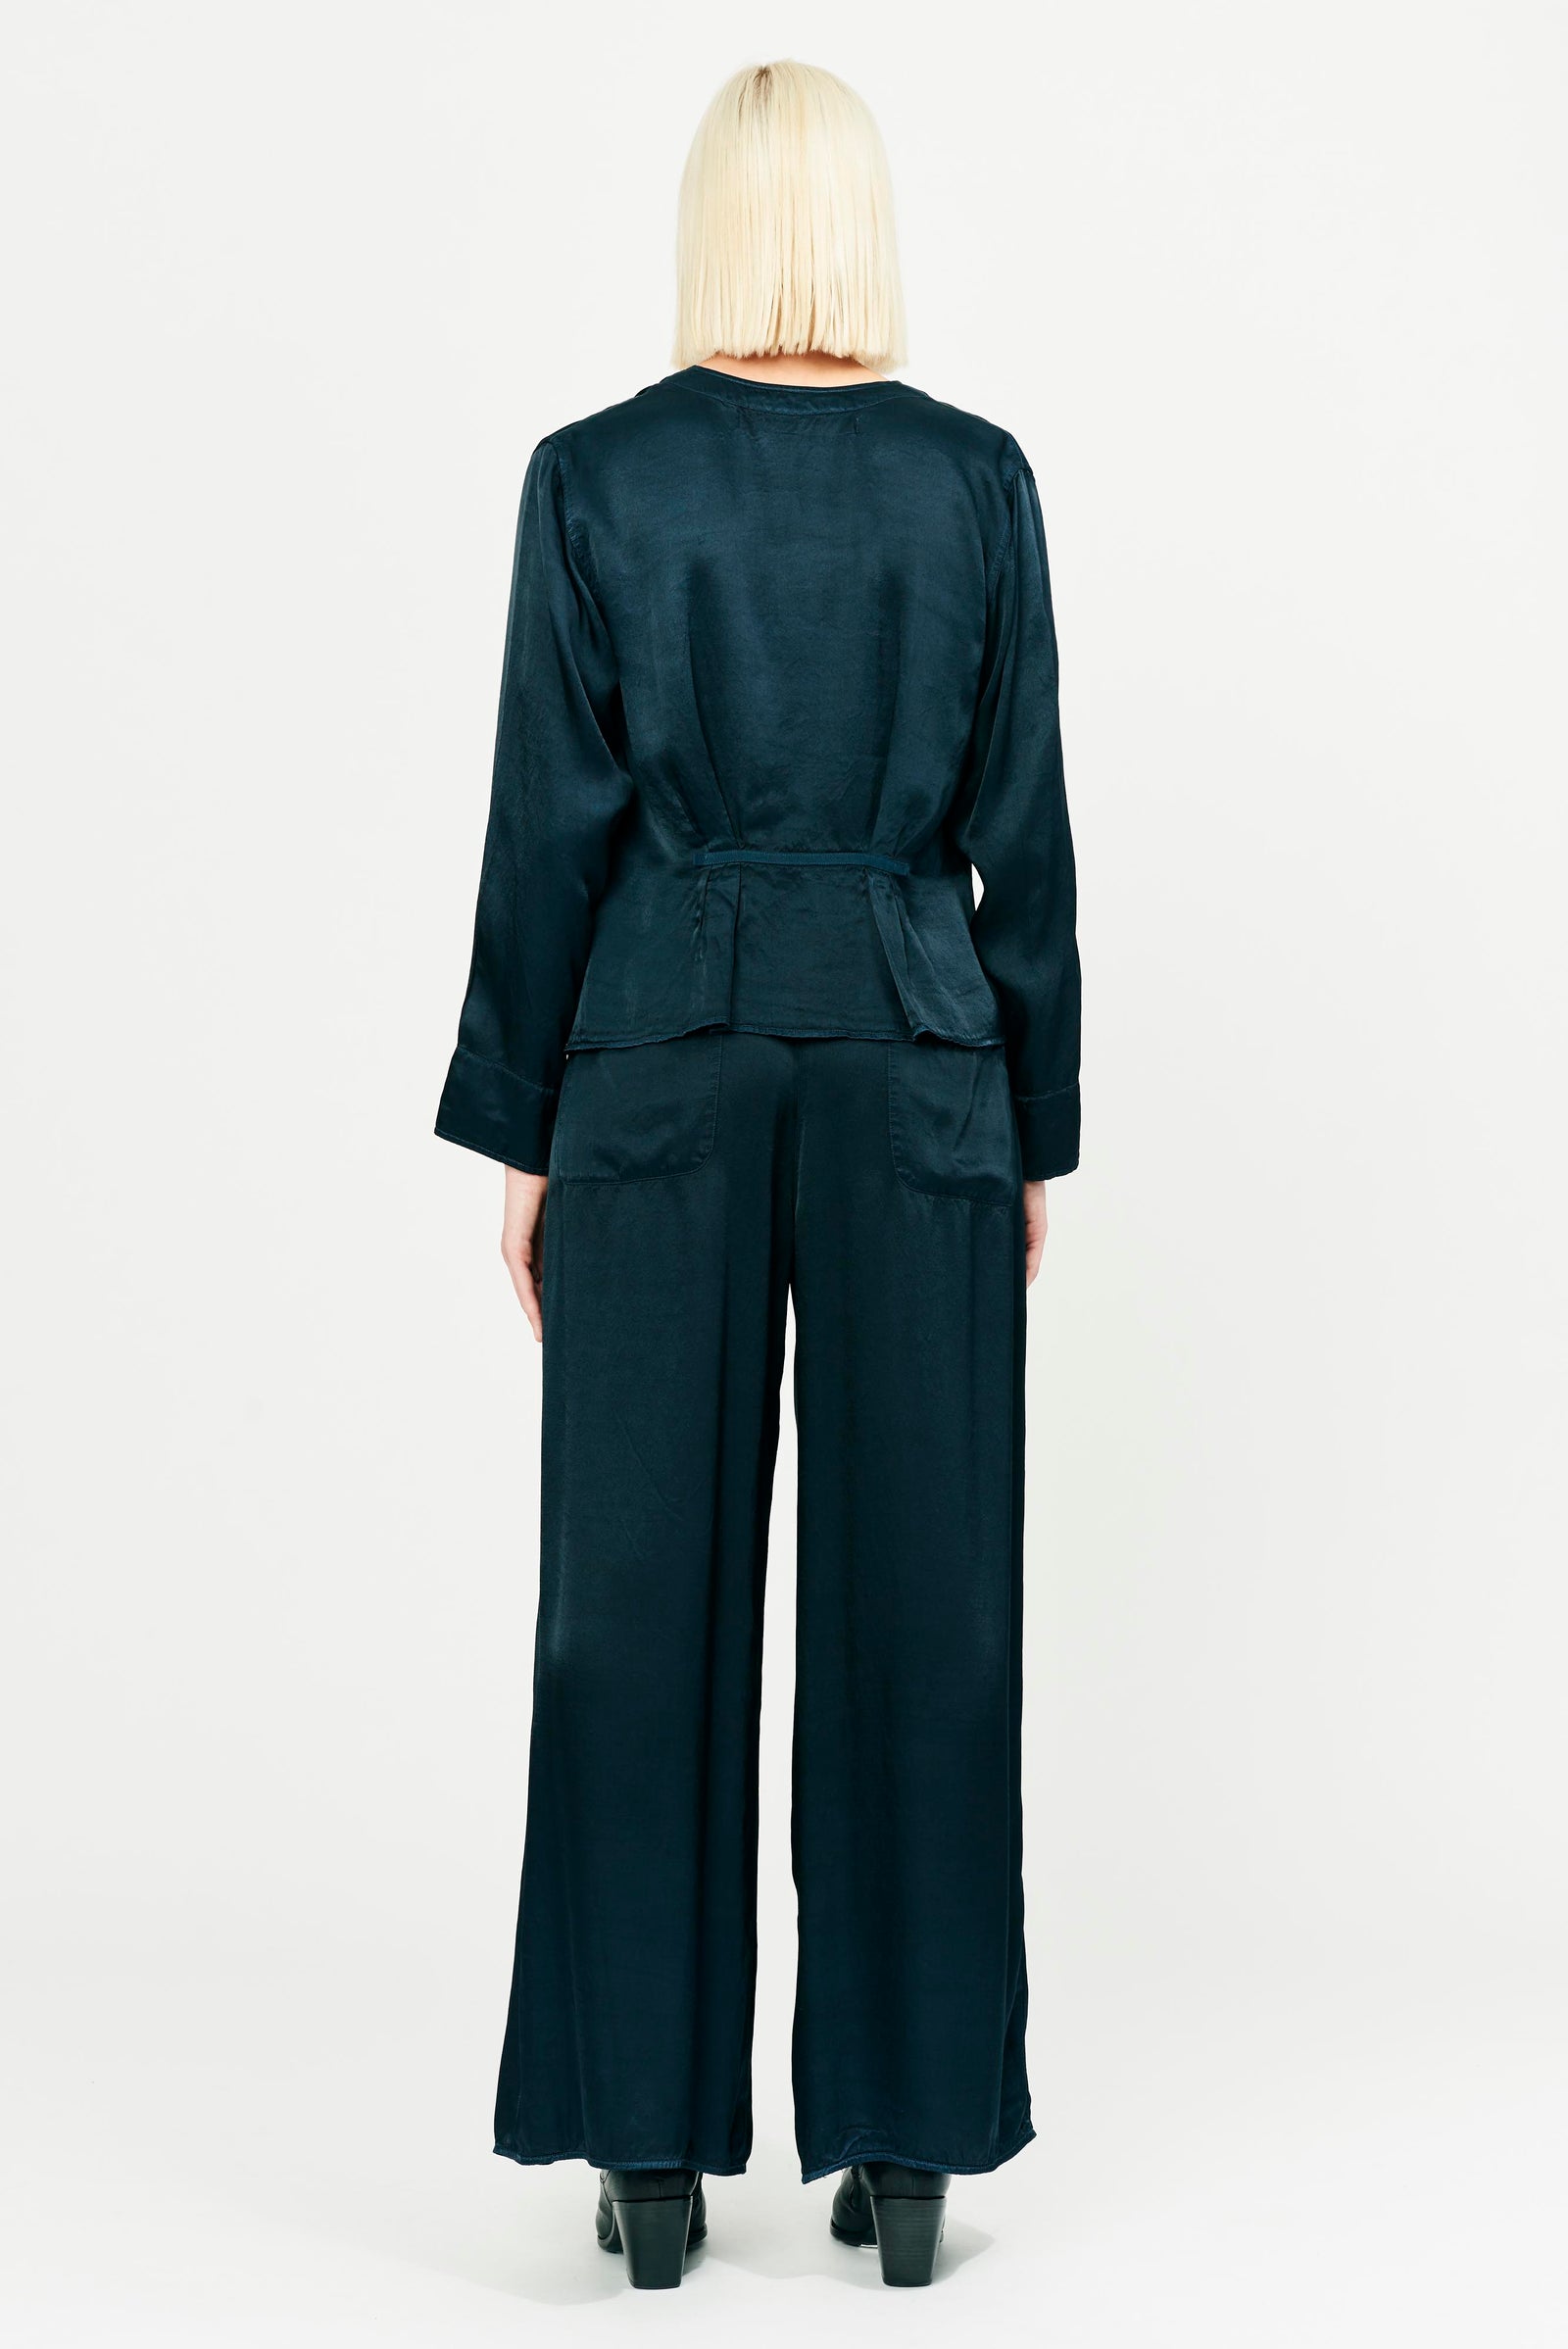 Midnight Pebble Satin Duster Pant Full Back View